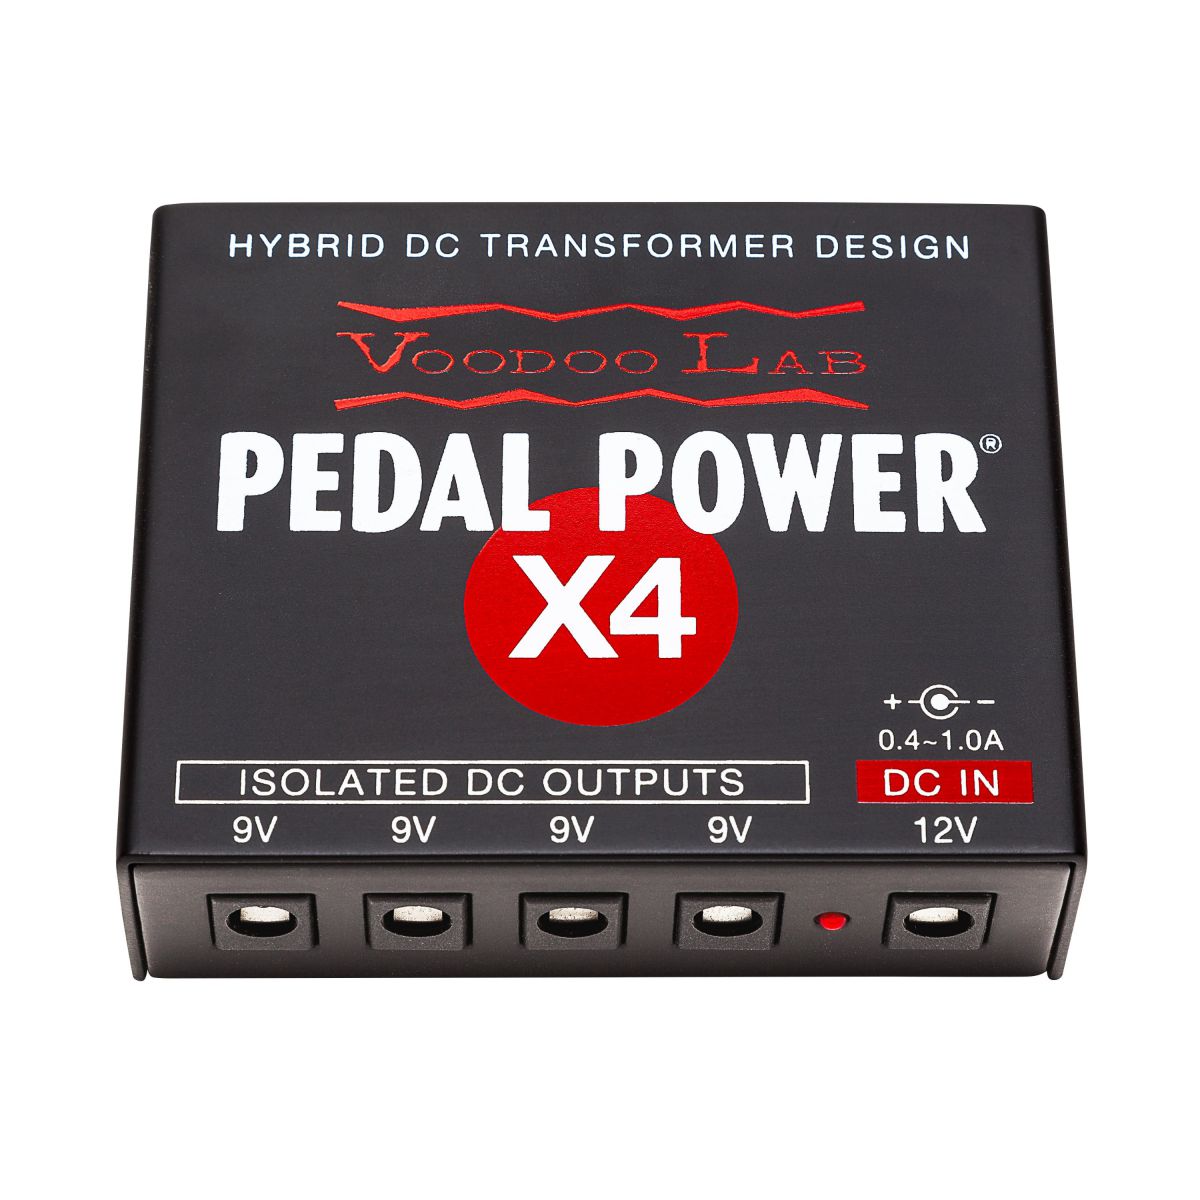 An image of Voodoo Lab Pedal Power X4 Power Supply | PMT Online